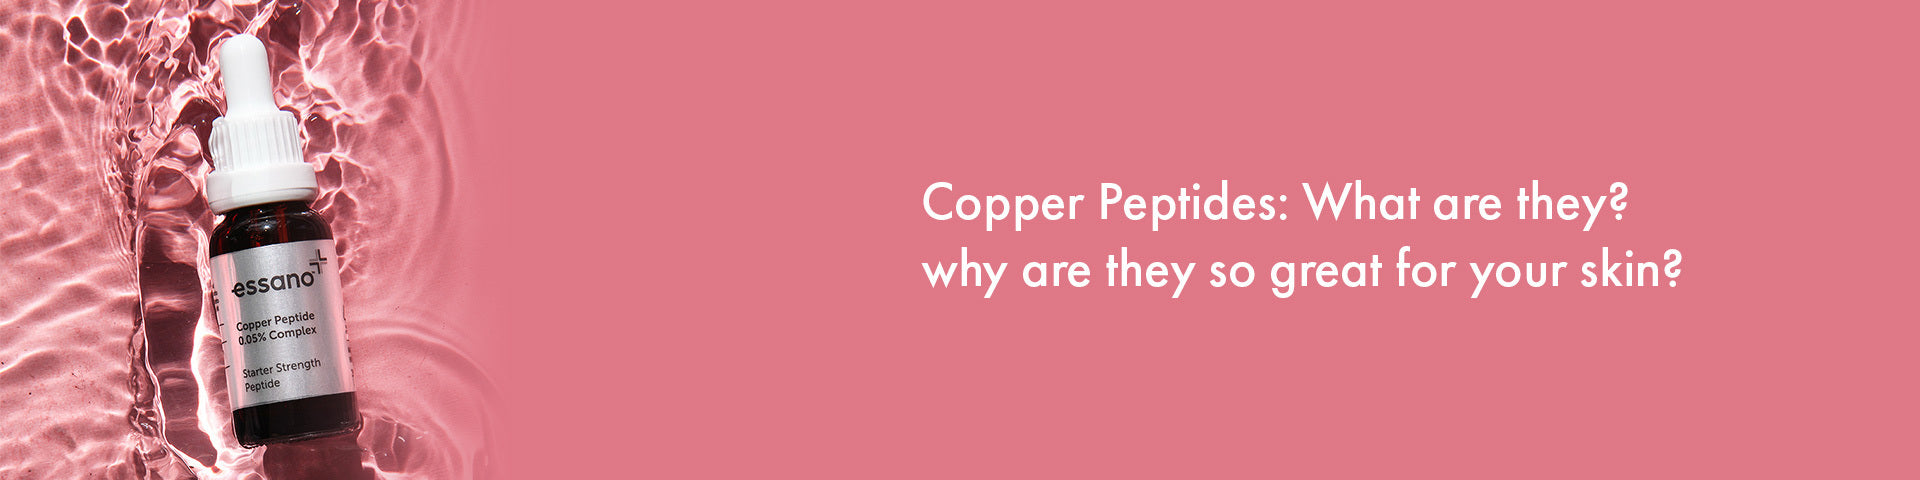 Copper Peptides: The Secret to more Youthful Looking Skin